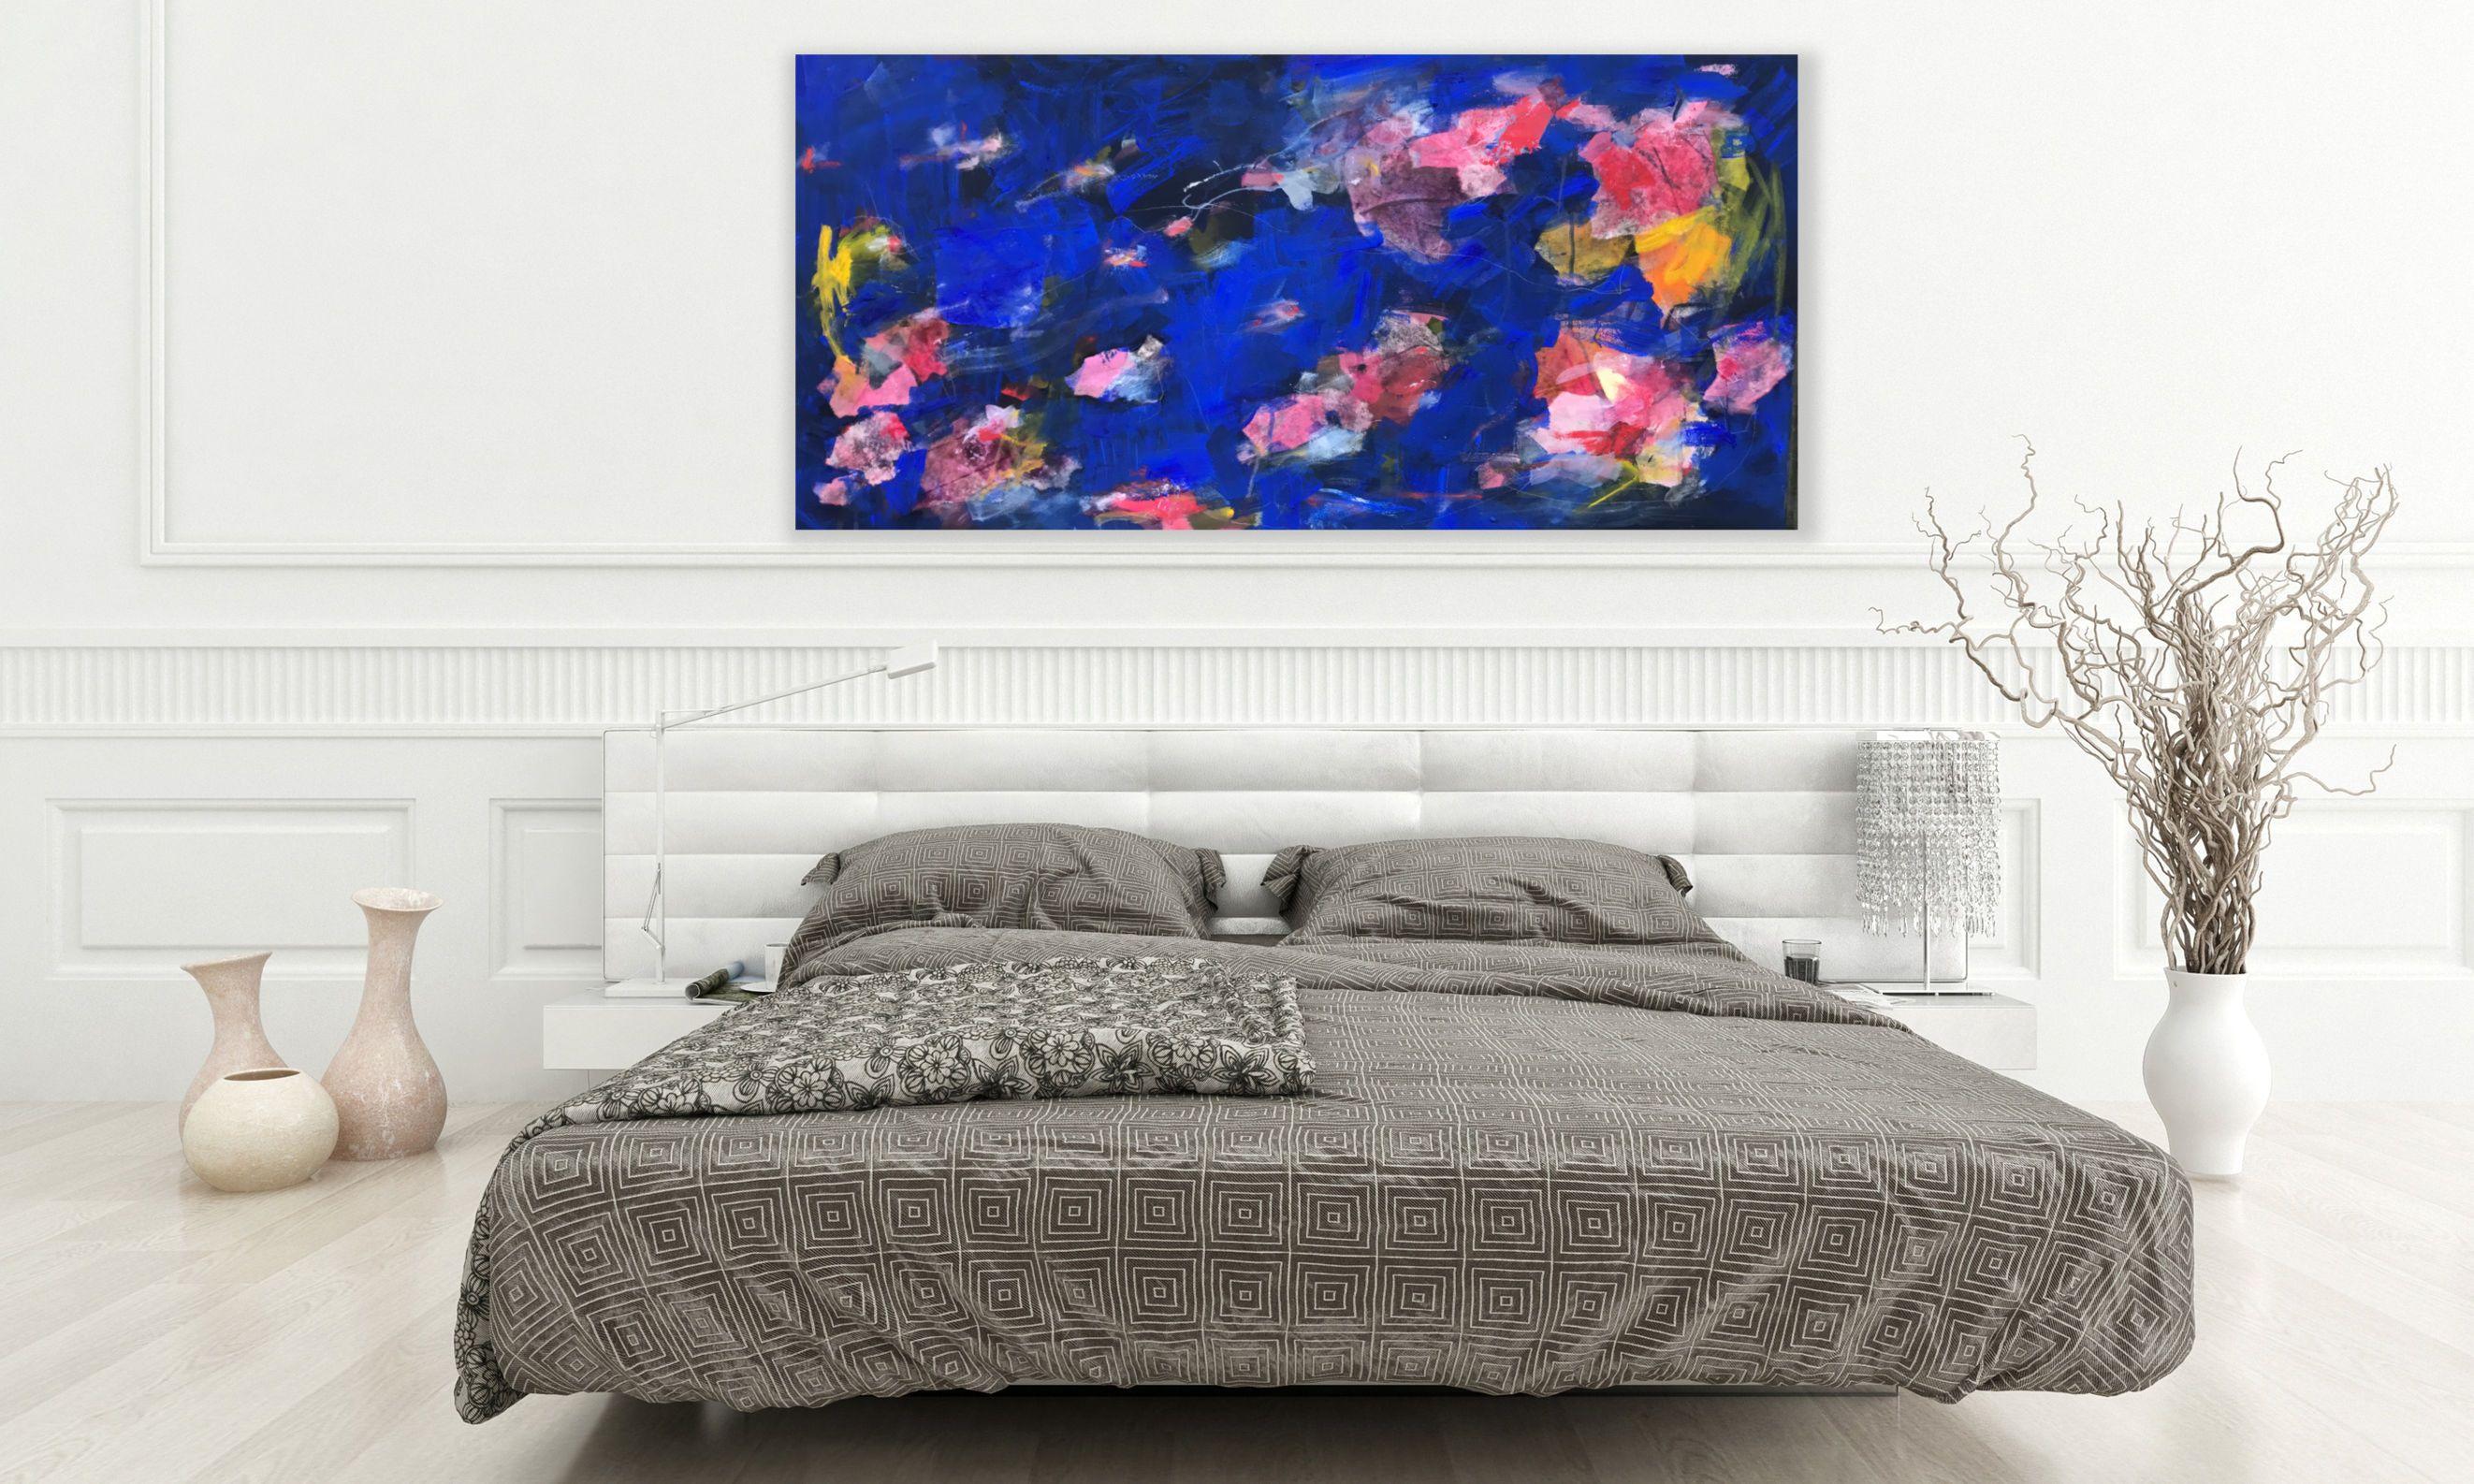 This beautifully vibrant floral abstract piece has been influenced by mood rather than imagery. Like all of my work it grew out of a process, where I am largely guided by the emerging painting. My starting point and guiding principle is colour. In